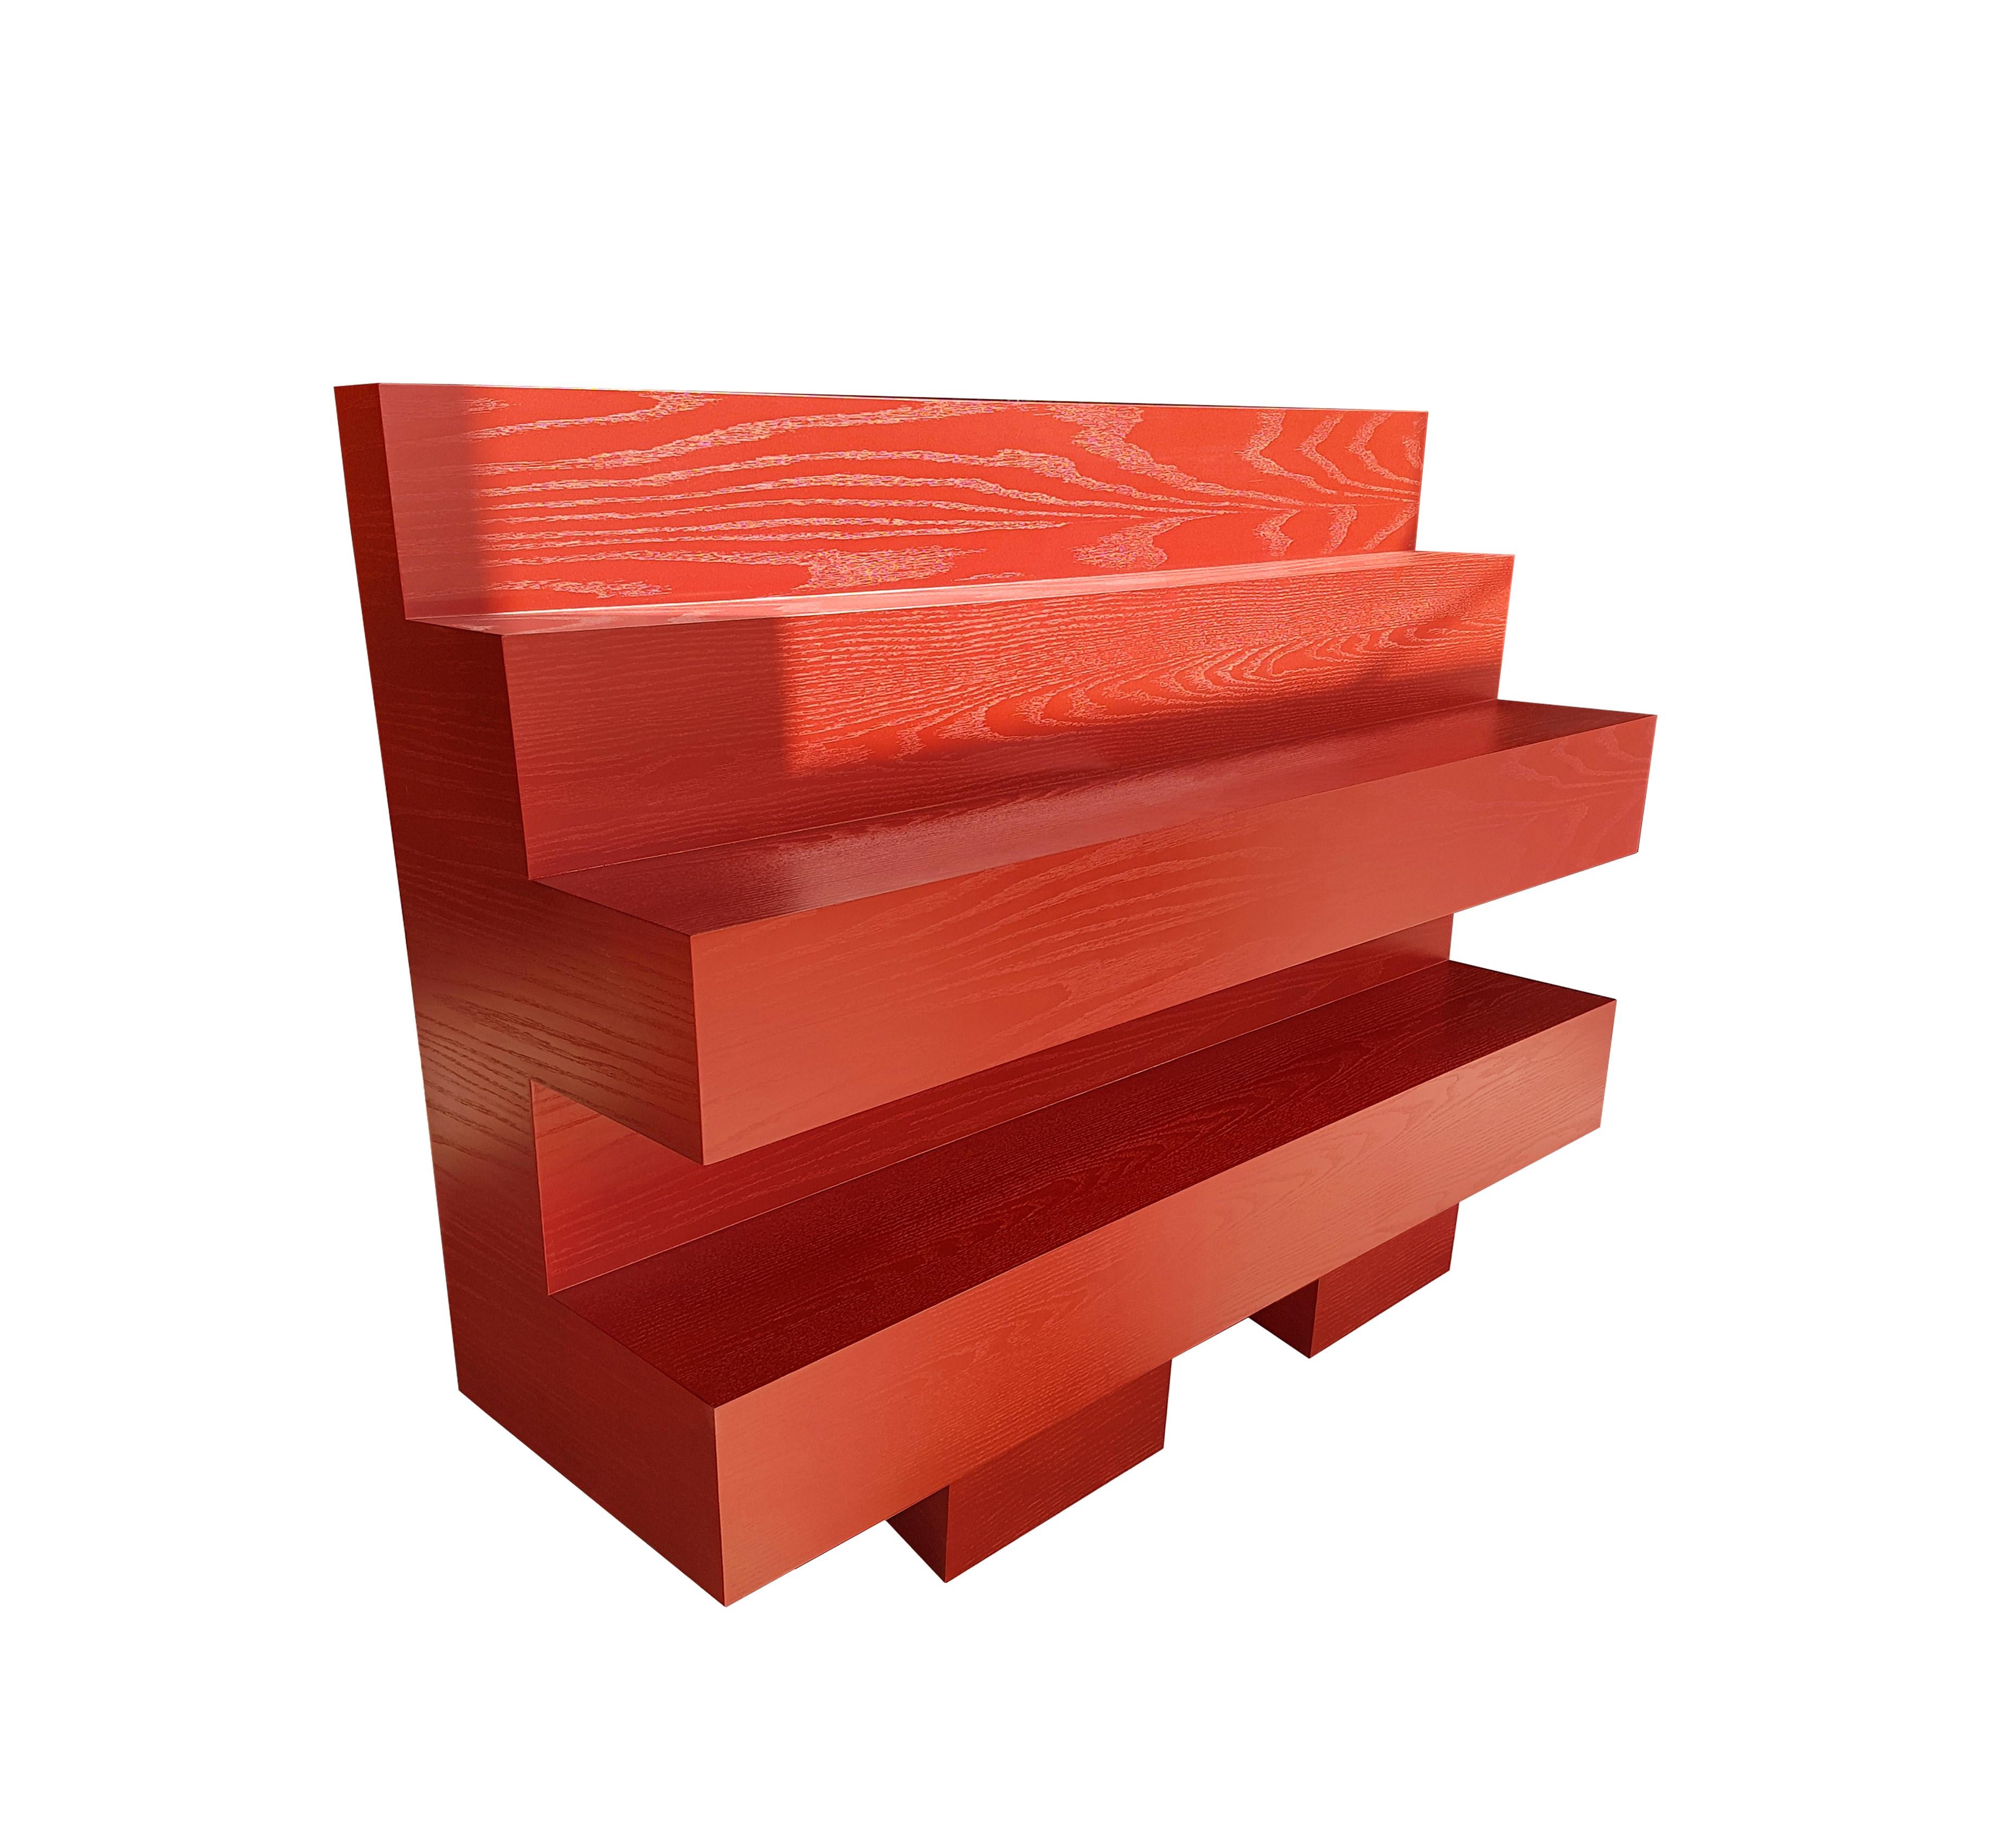 Dark pastel Red to accommodate a robust personal library. This piece with an extended lines and layered step design will give you the freedom to align your book. Part of (the topography of our intimate being).
It has a very smooth finish which